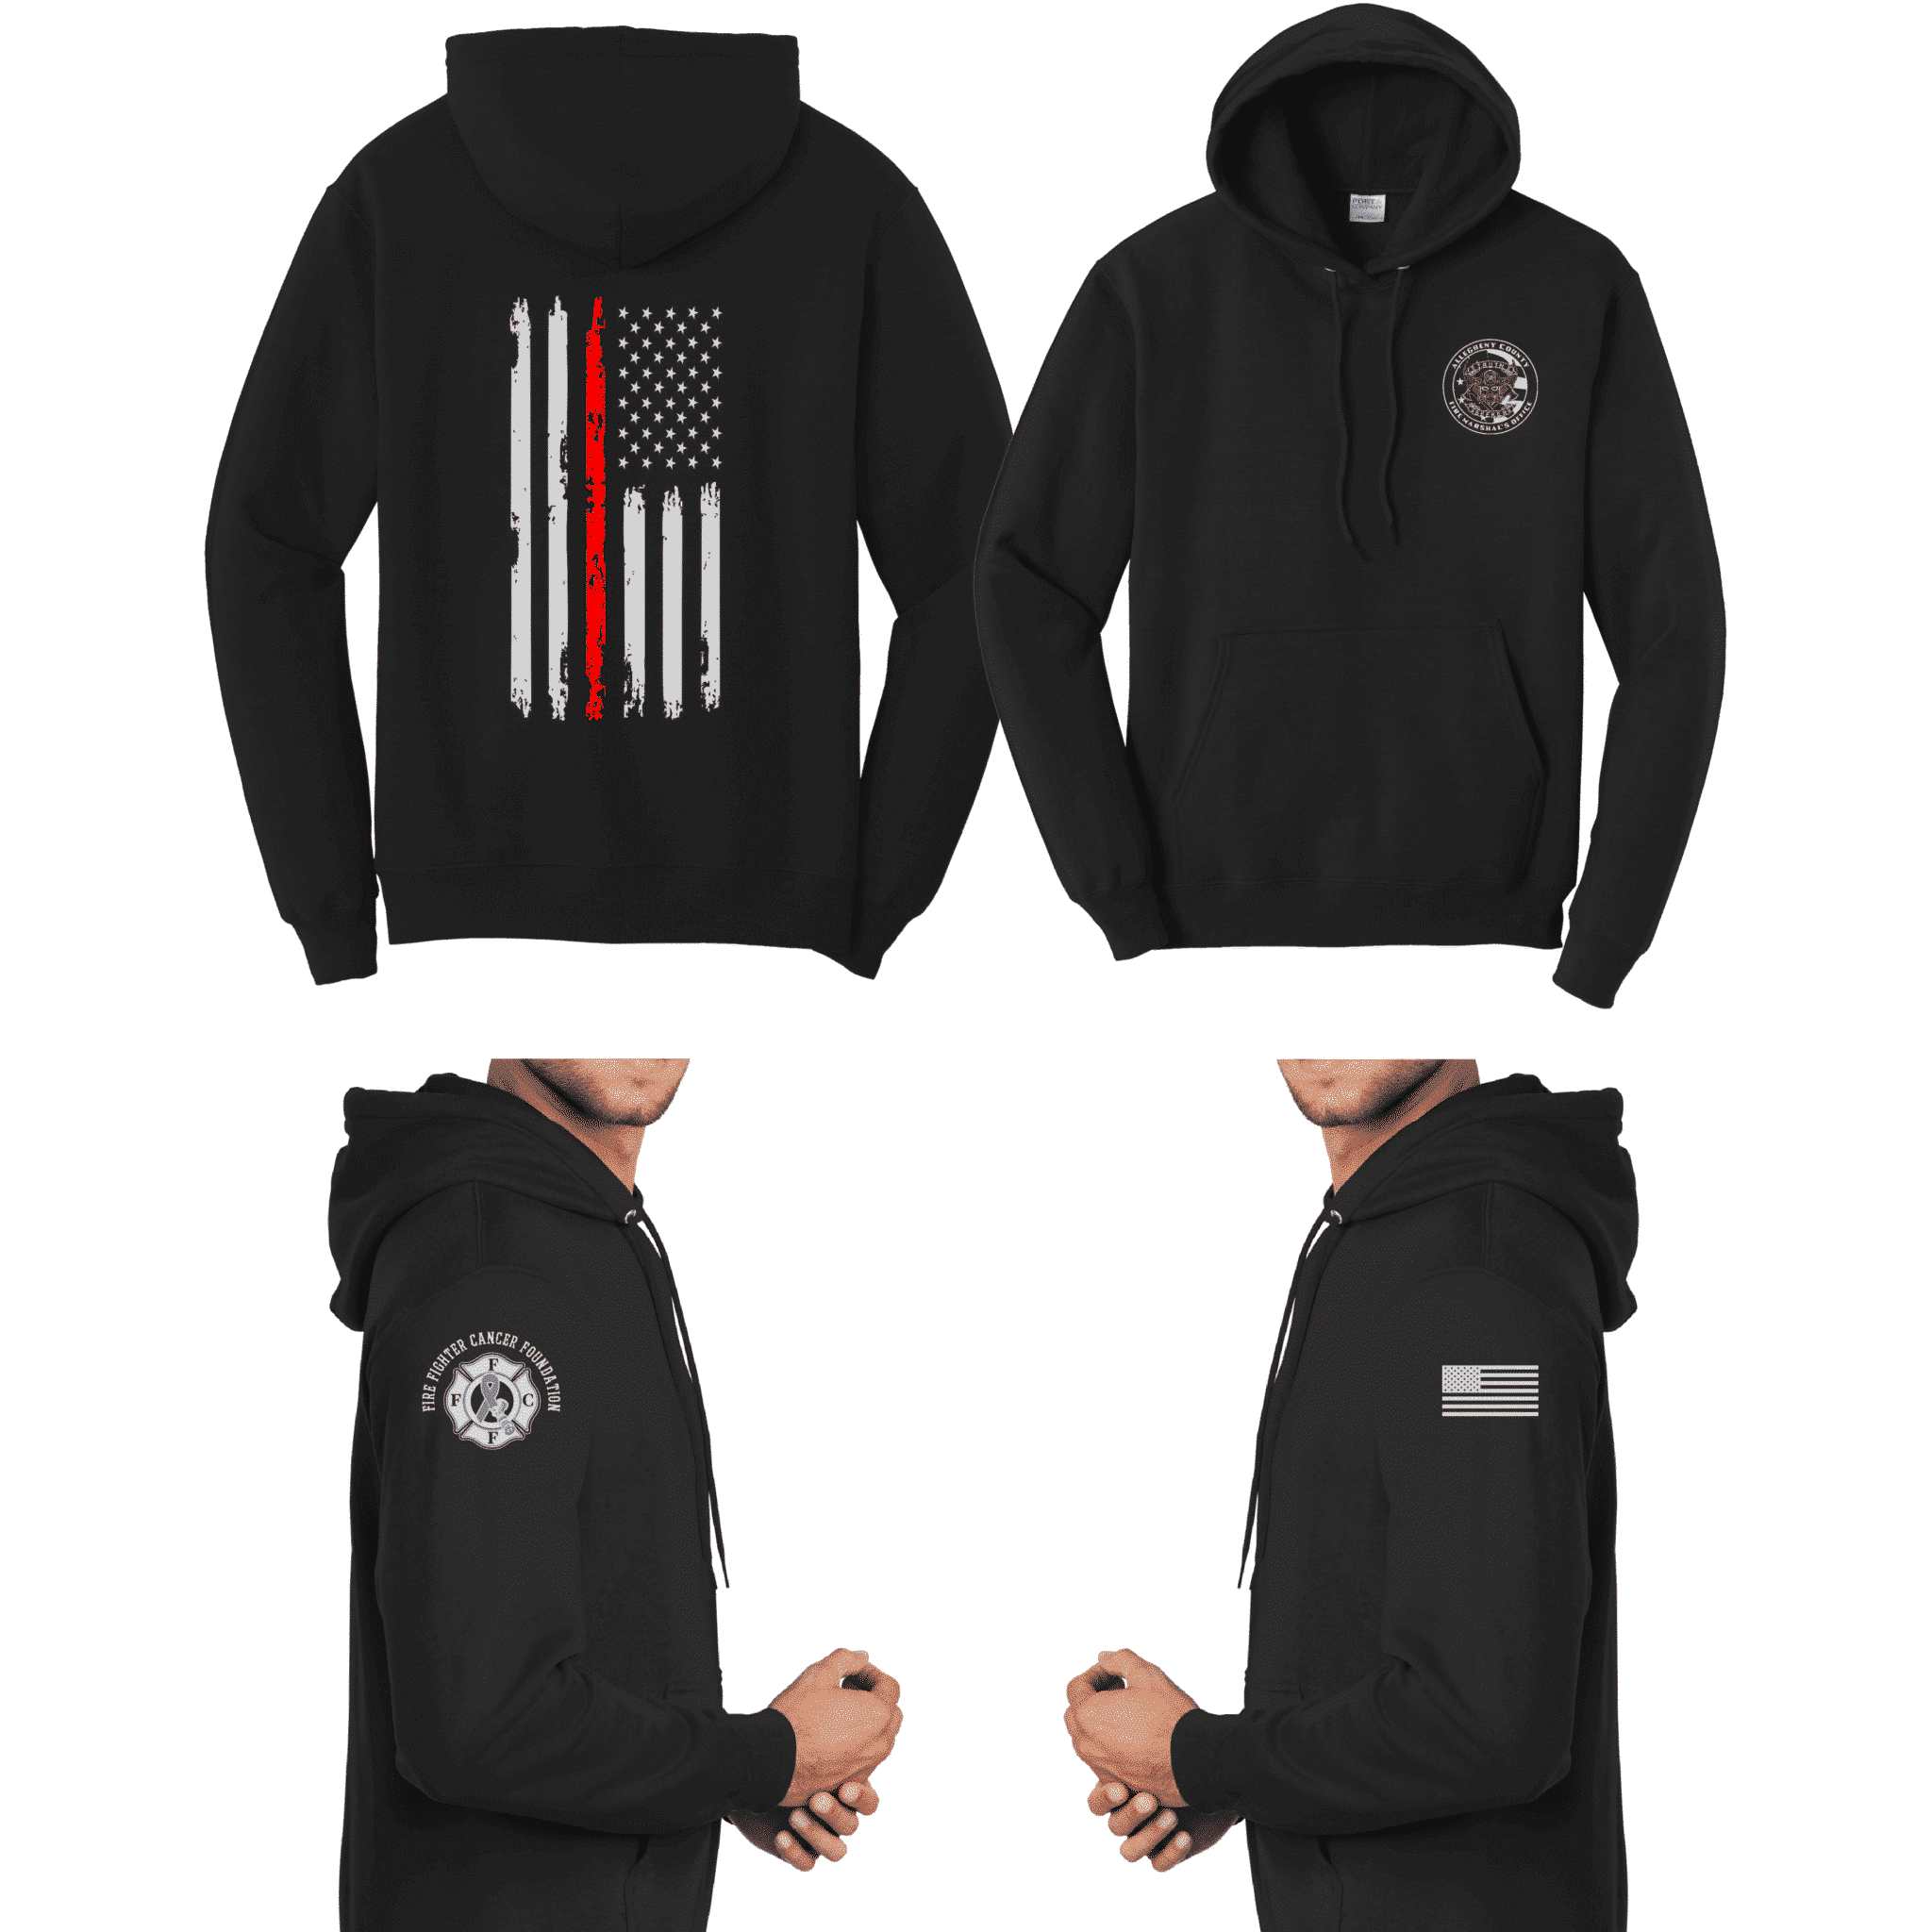 ACFM - PC78H - Port & Co Pullover Hoodie